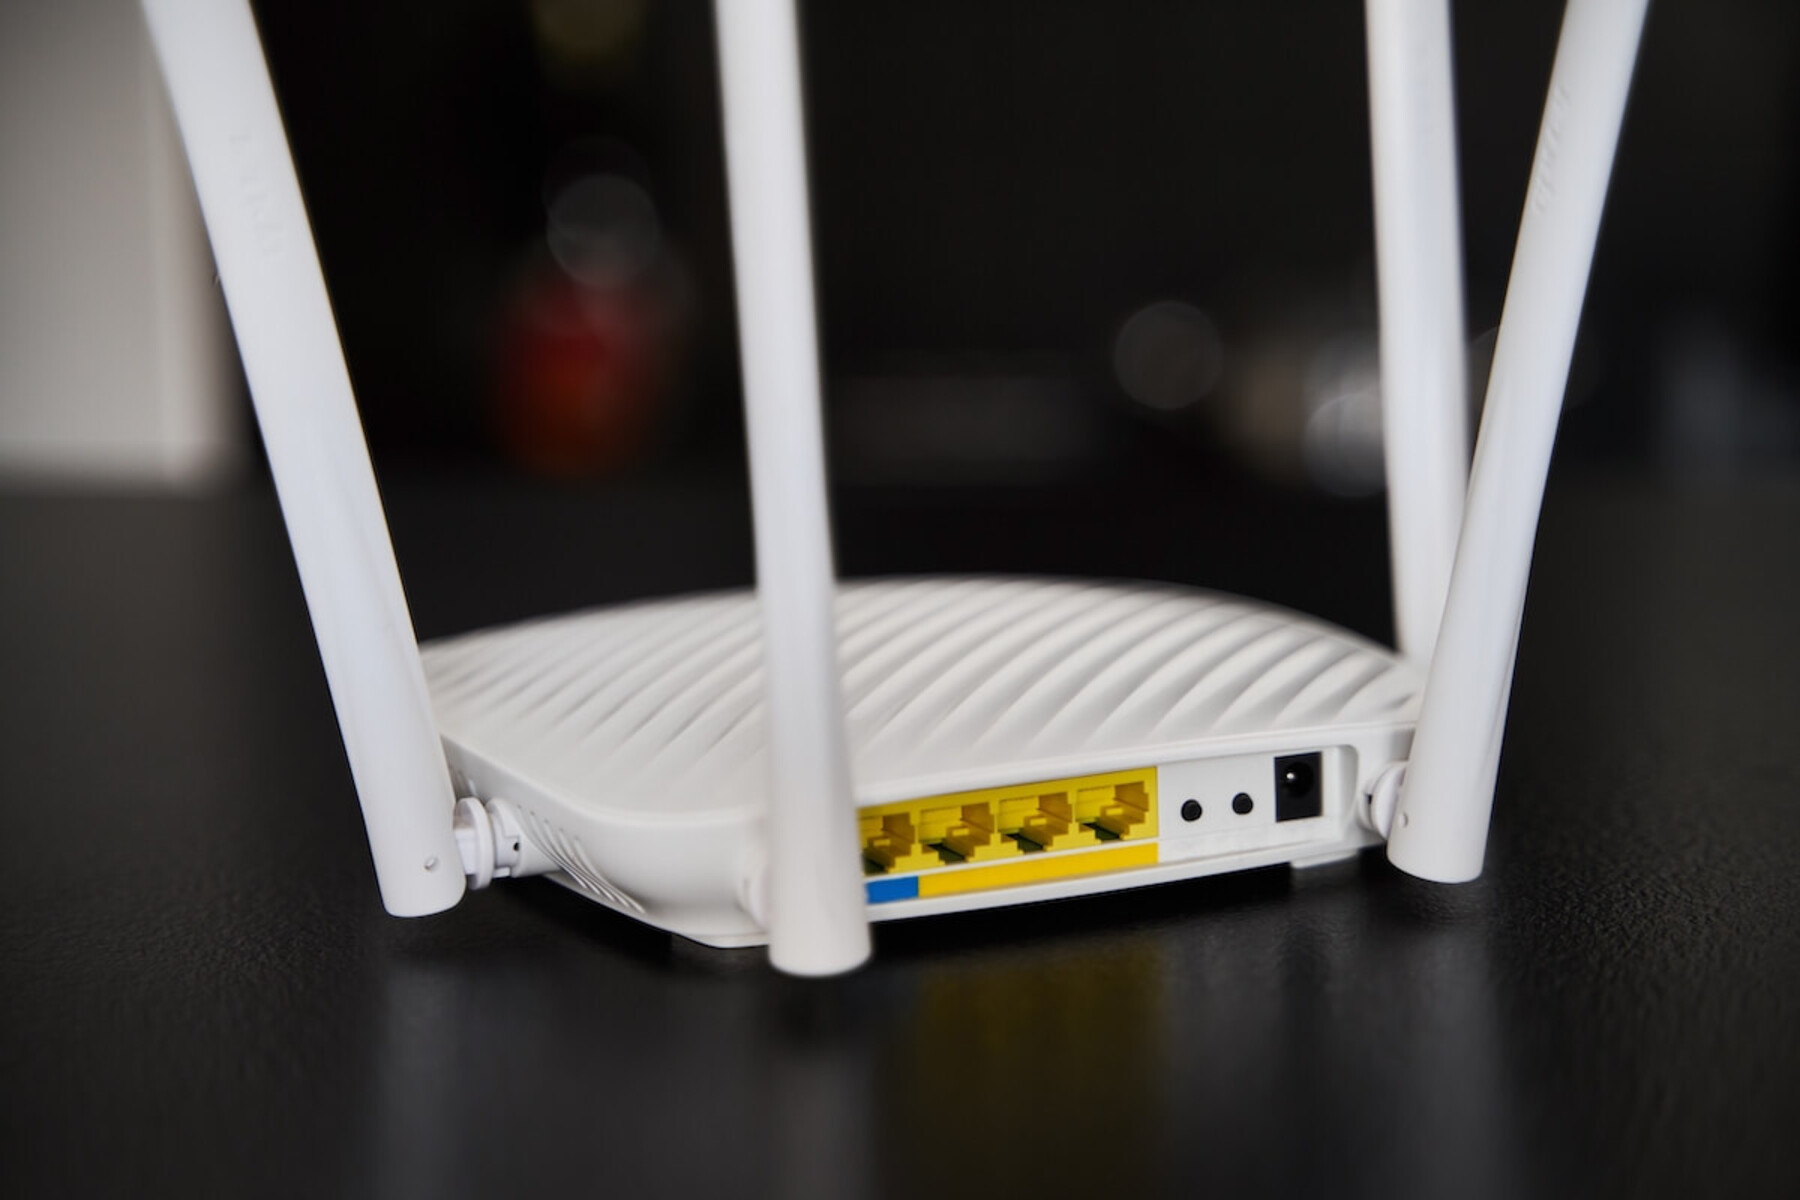 How To Check Data Usage On A Wi-Fi Router